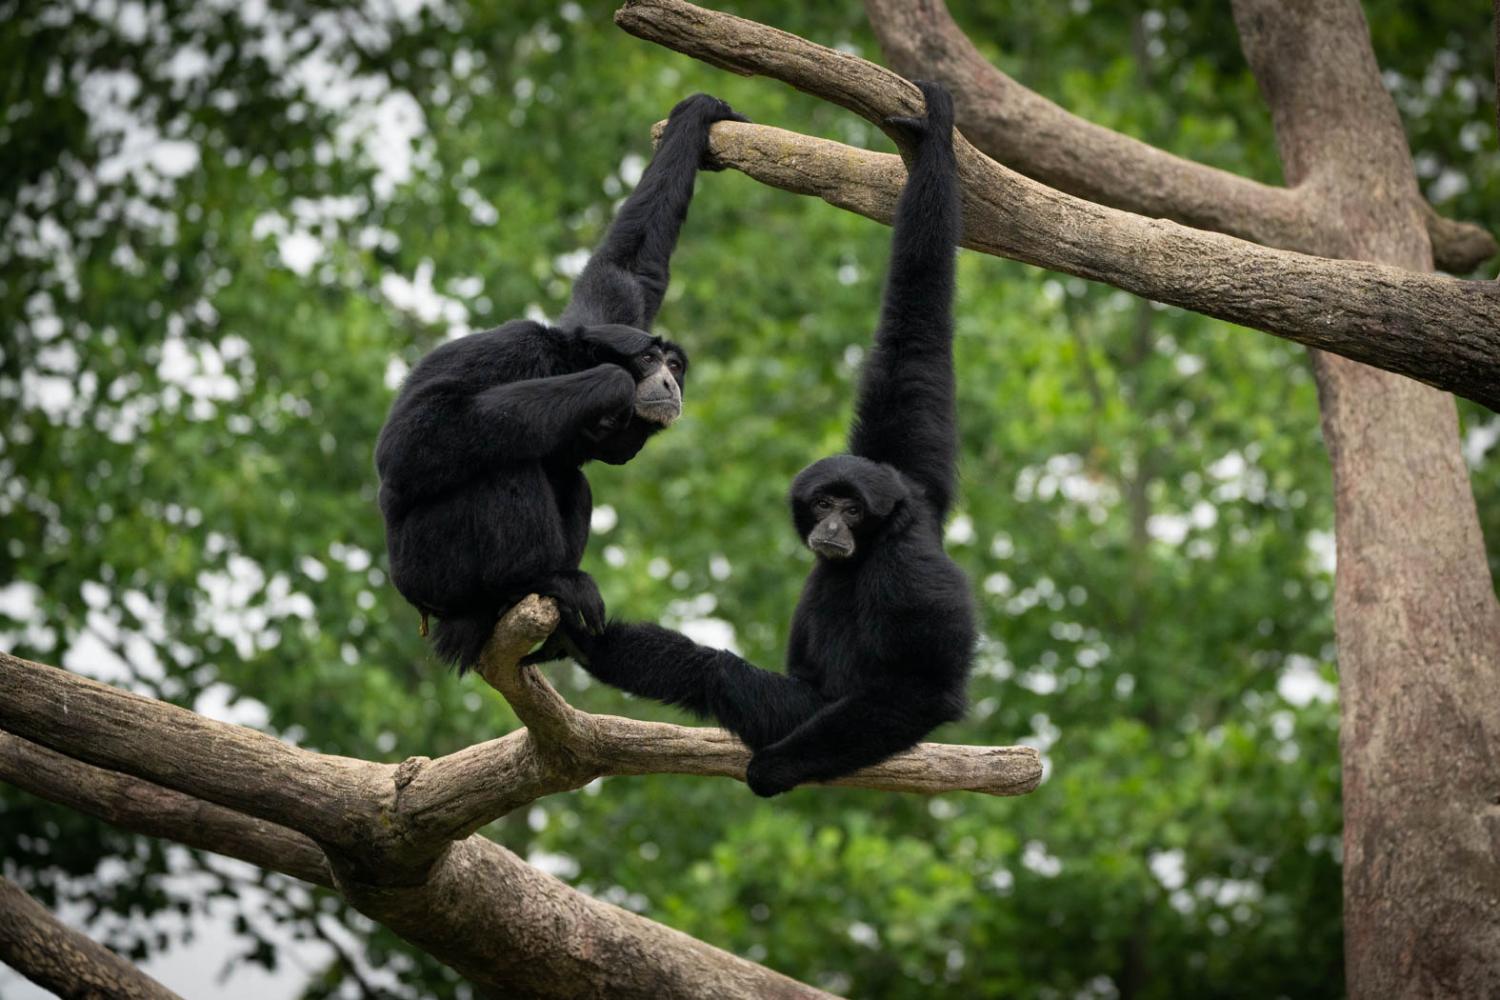 Two siamangs in tree